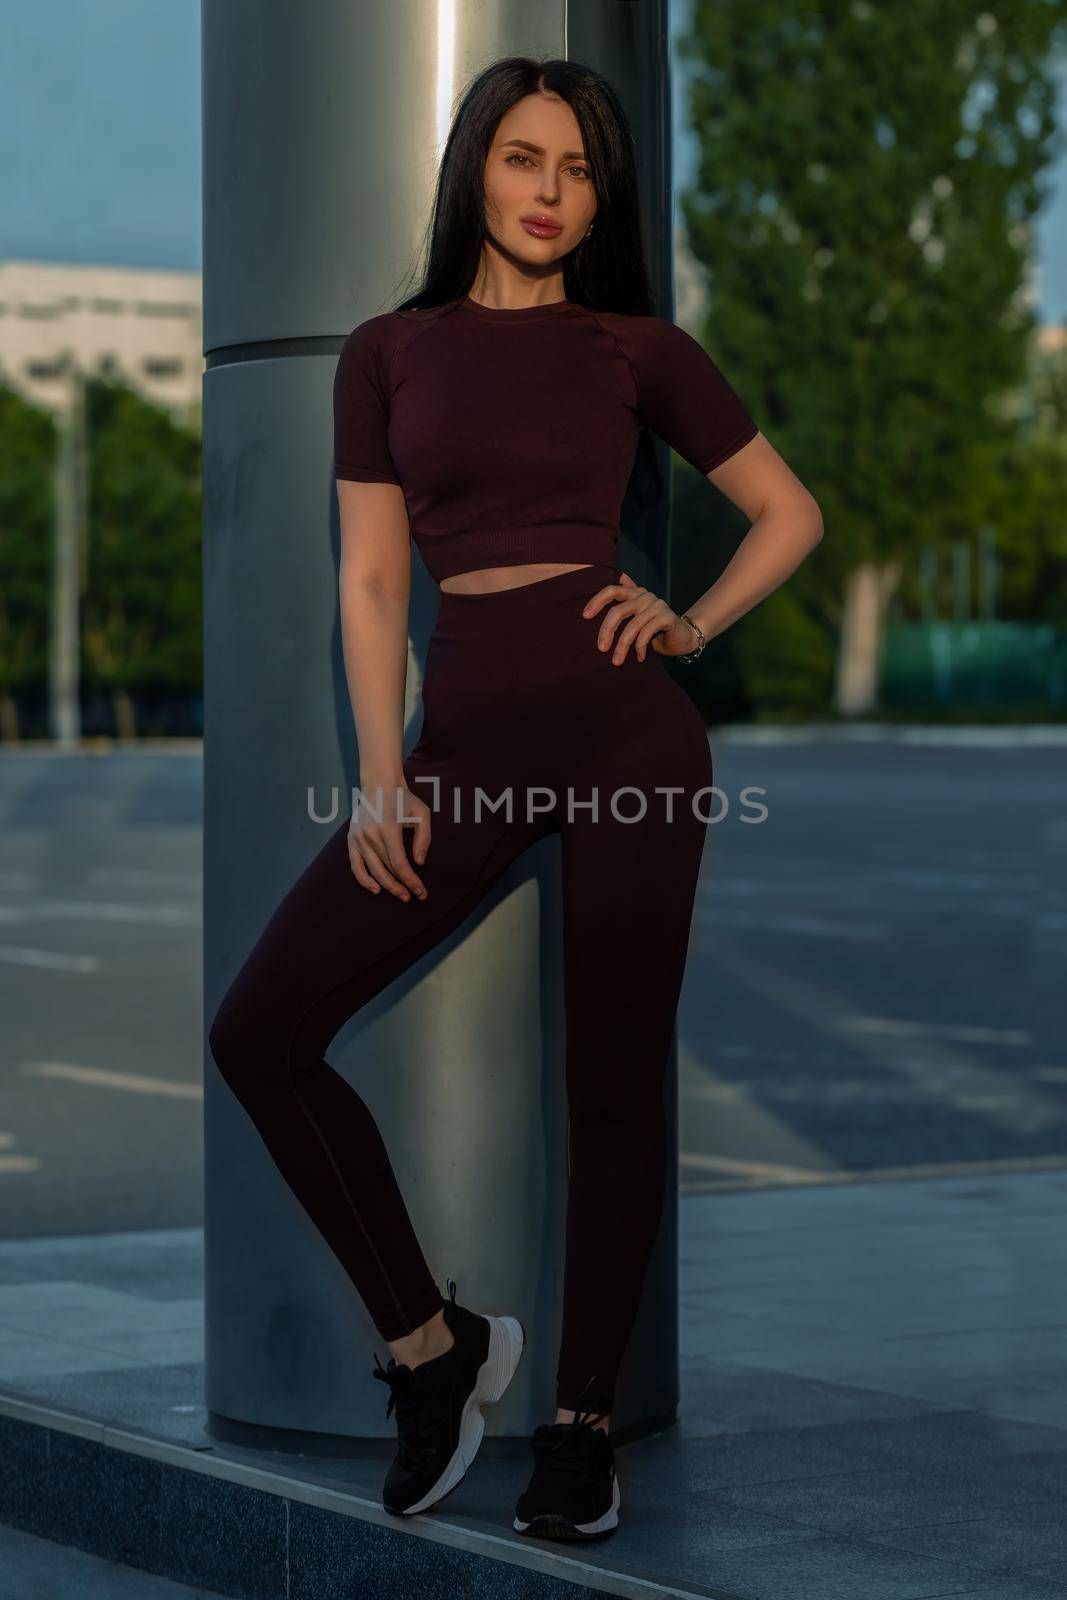 Streetstyle shot of sporty fit woman poses dressed in sportswear poses outdoors by but_photo